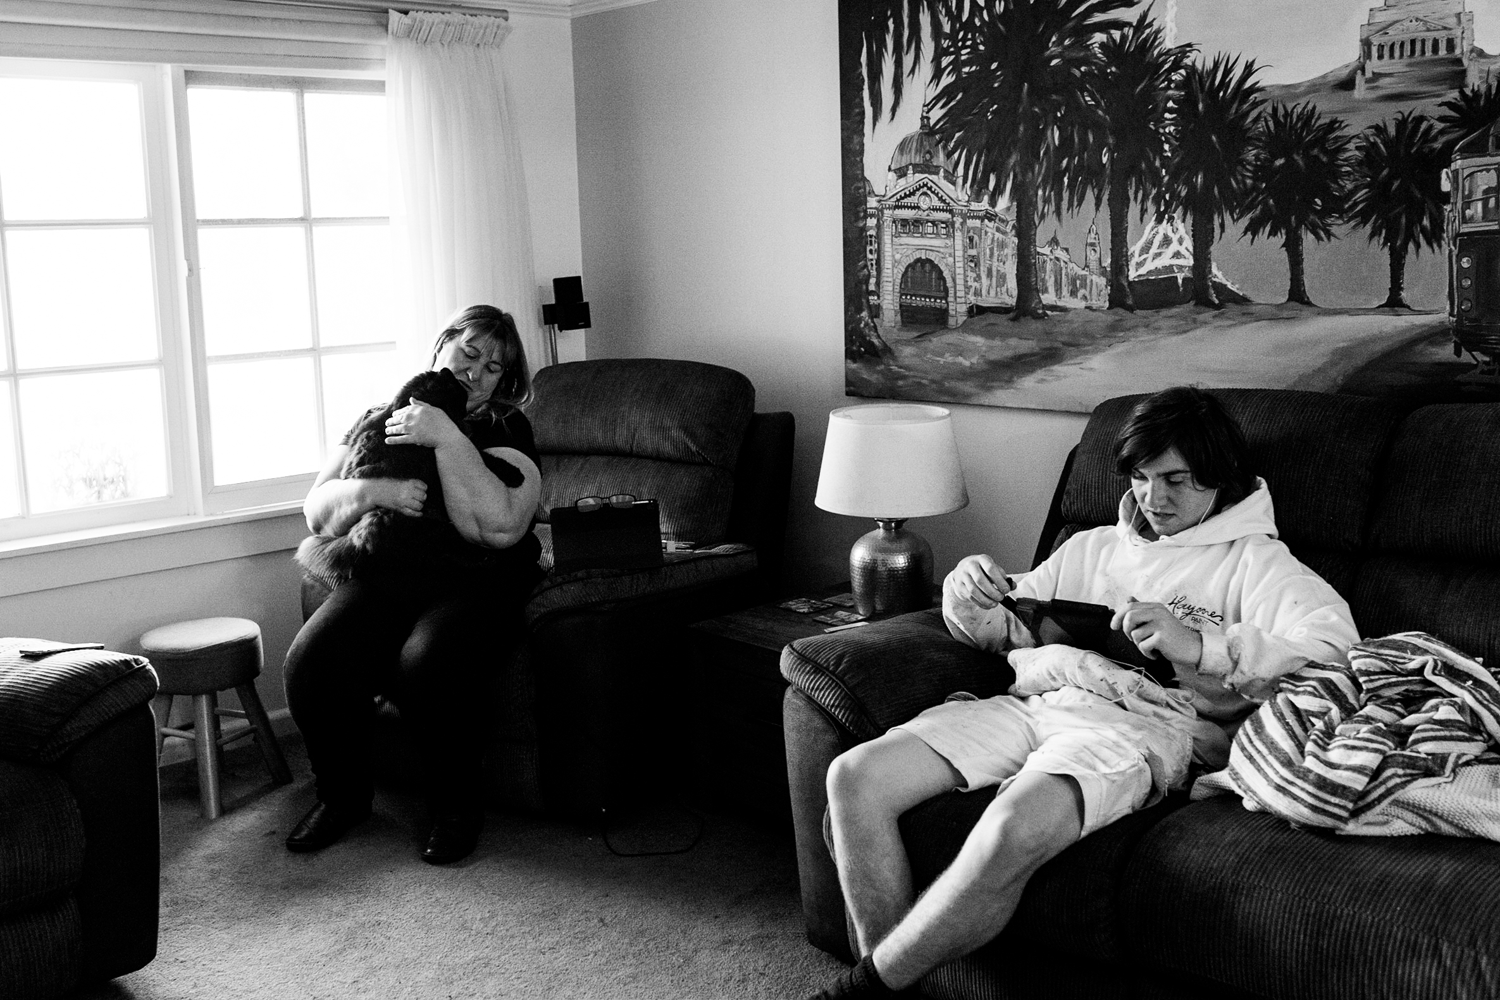 Black and white candid photograph of a woman and a teenage boy sitting in a residential lounge room. Woman holds dog. 